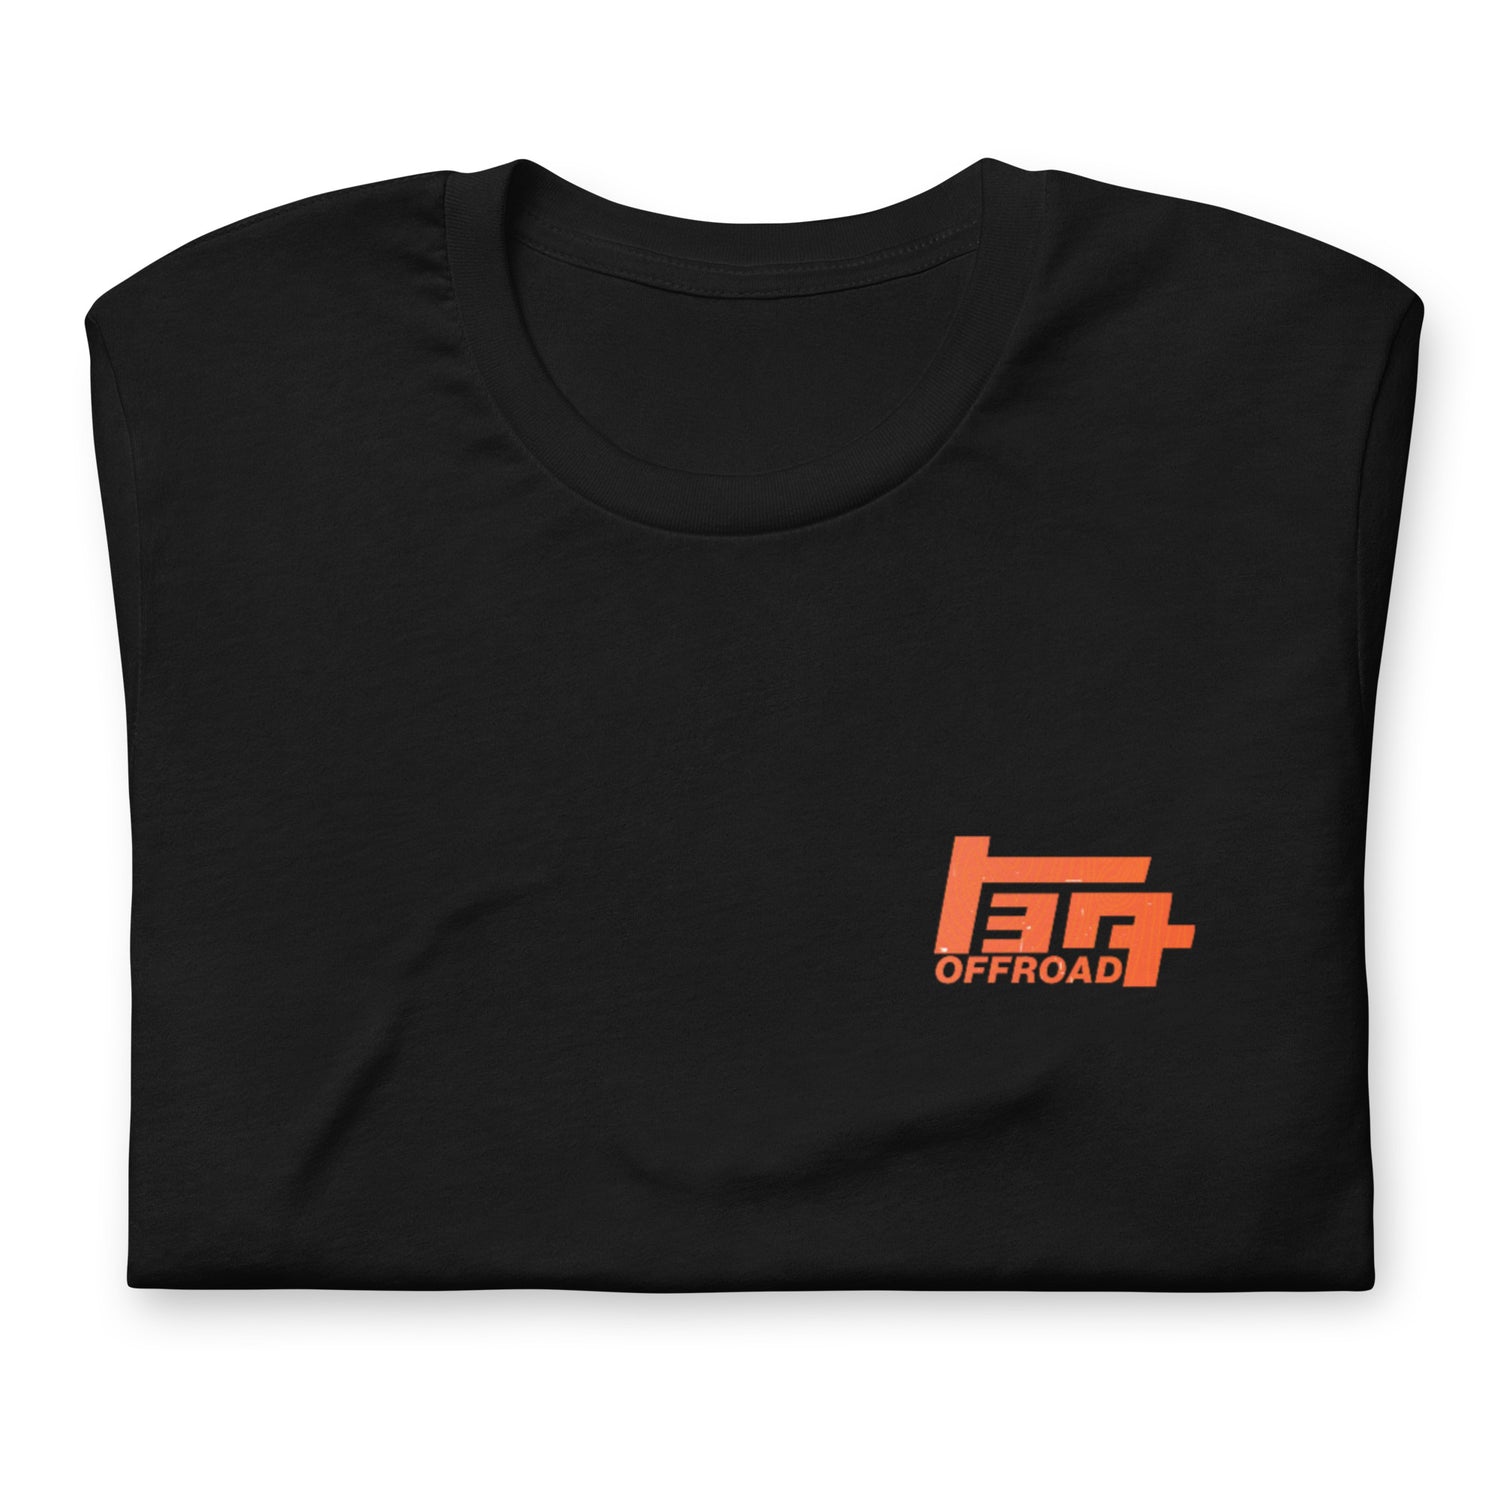 TEQ Offroad Topography Shirt (Square Back)